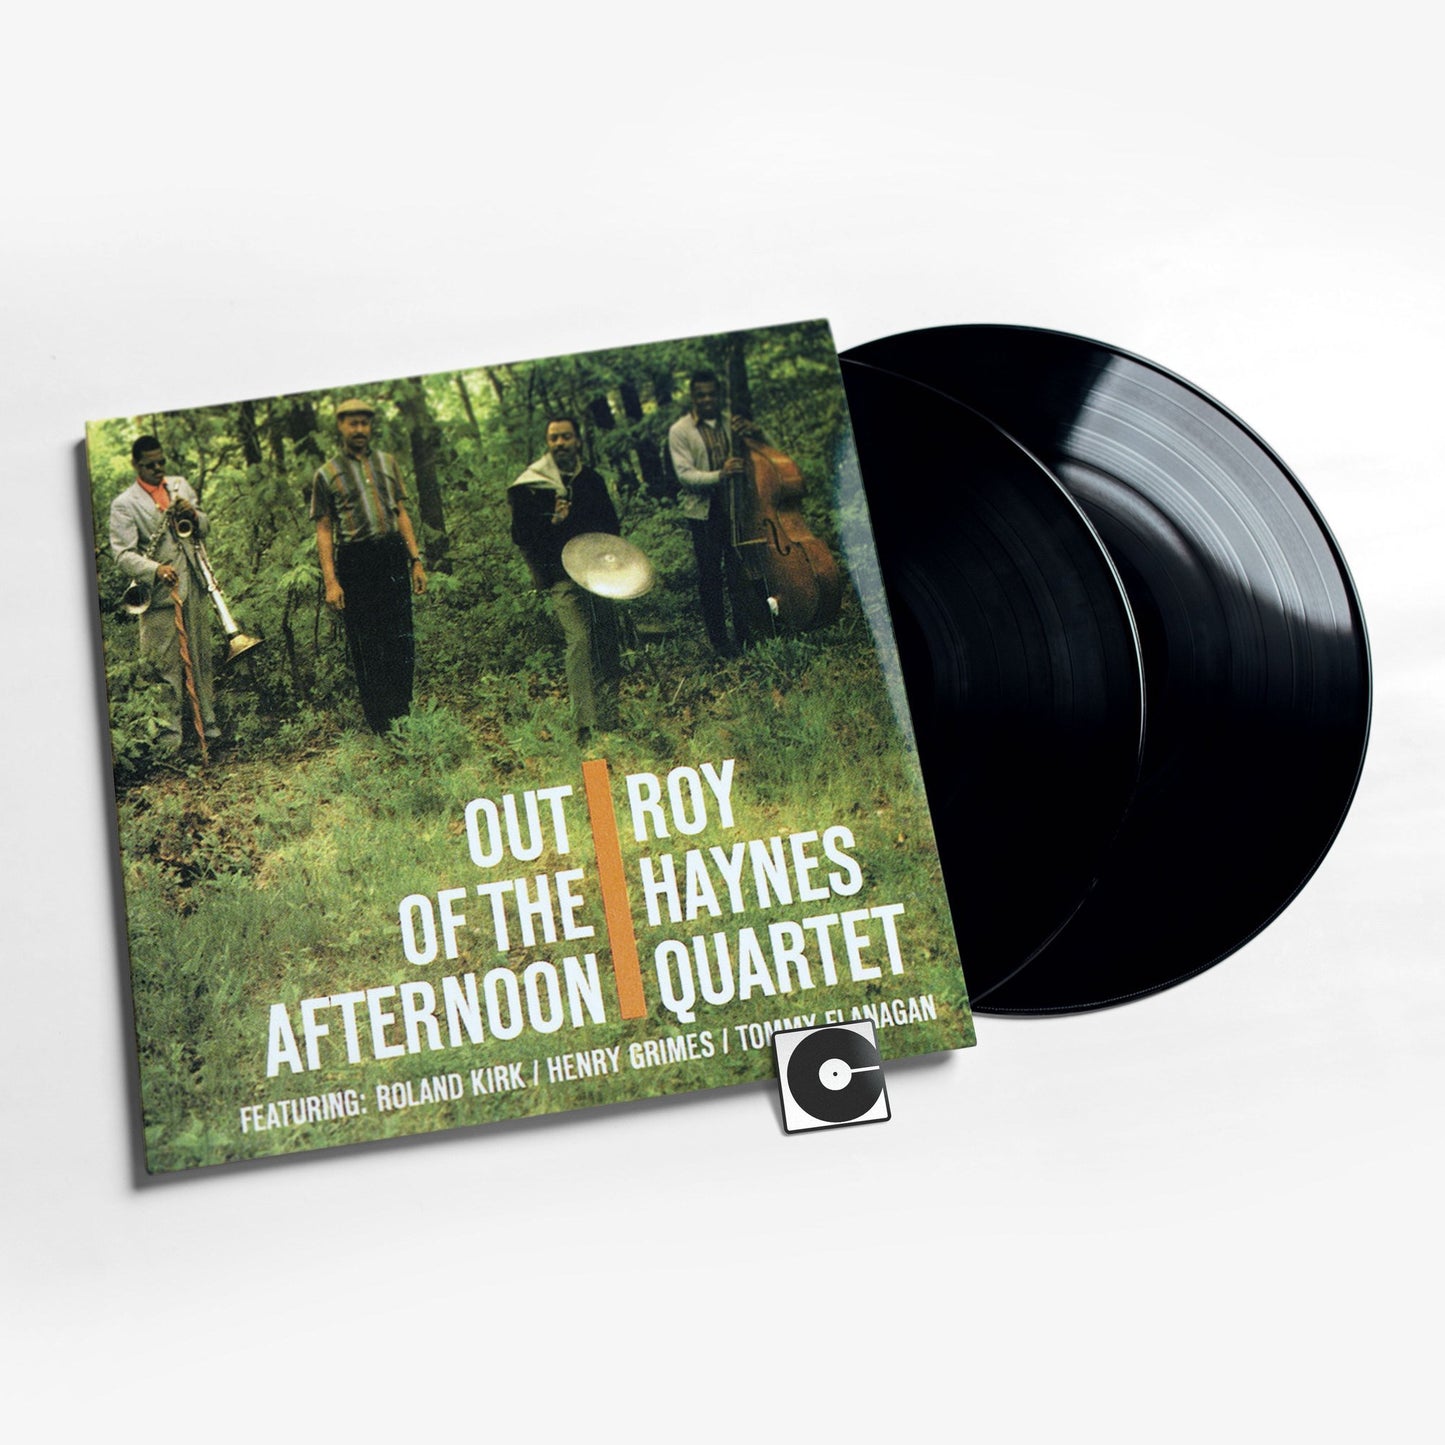 Roy Haynes - "Out Of The Afternoon" Analogue Productions